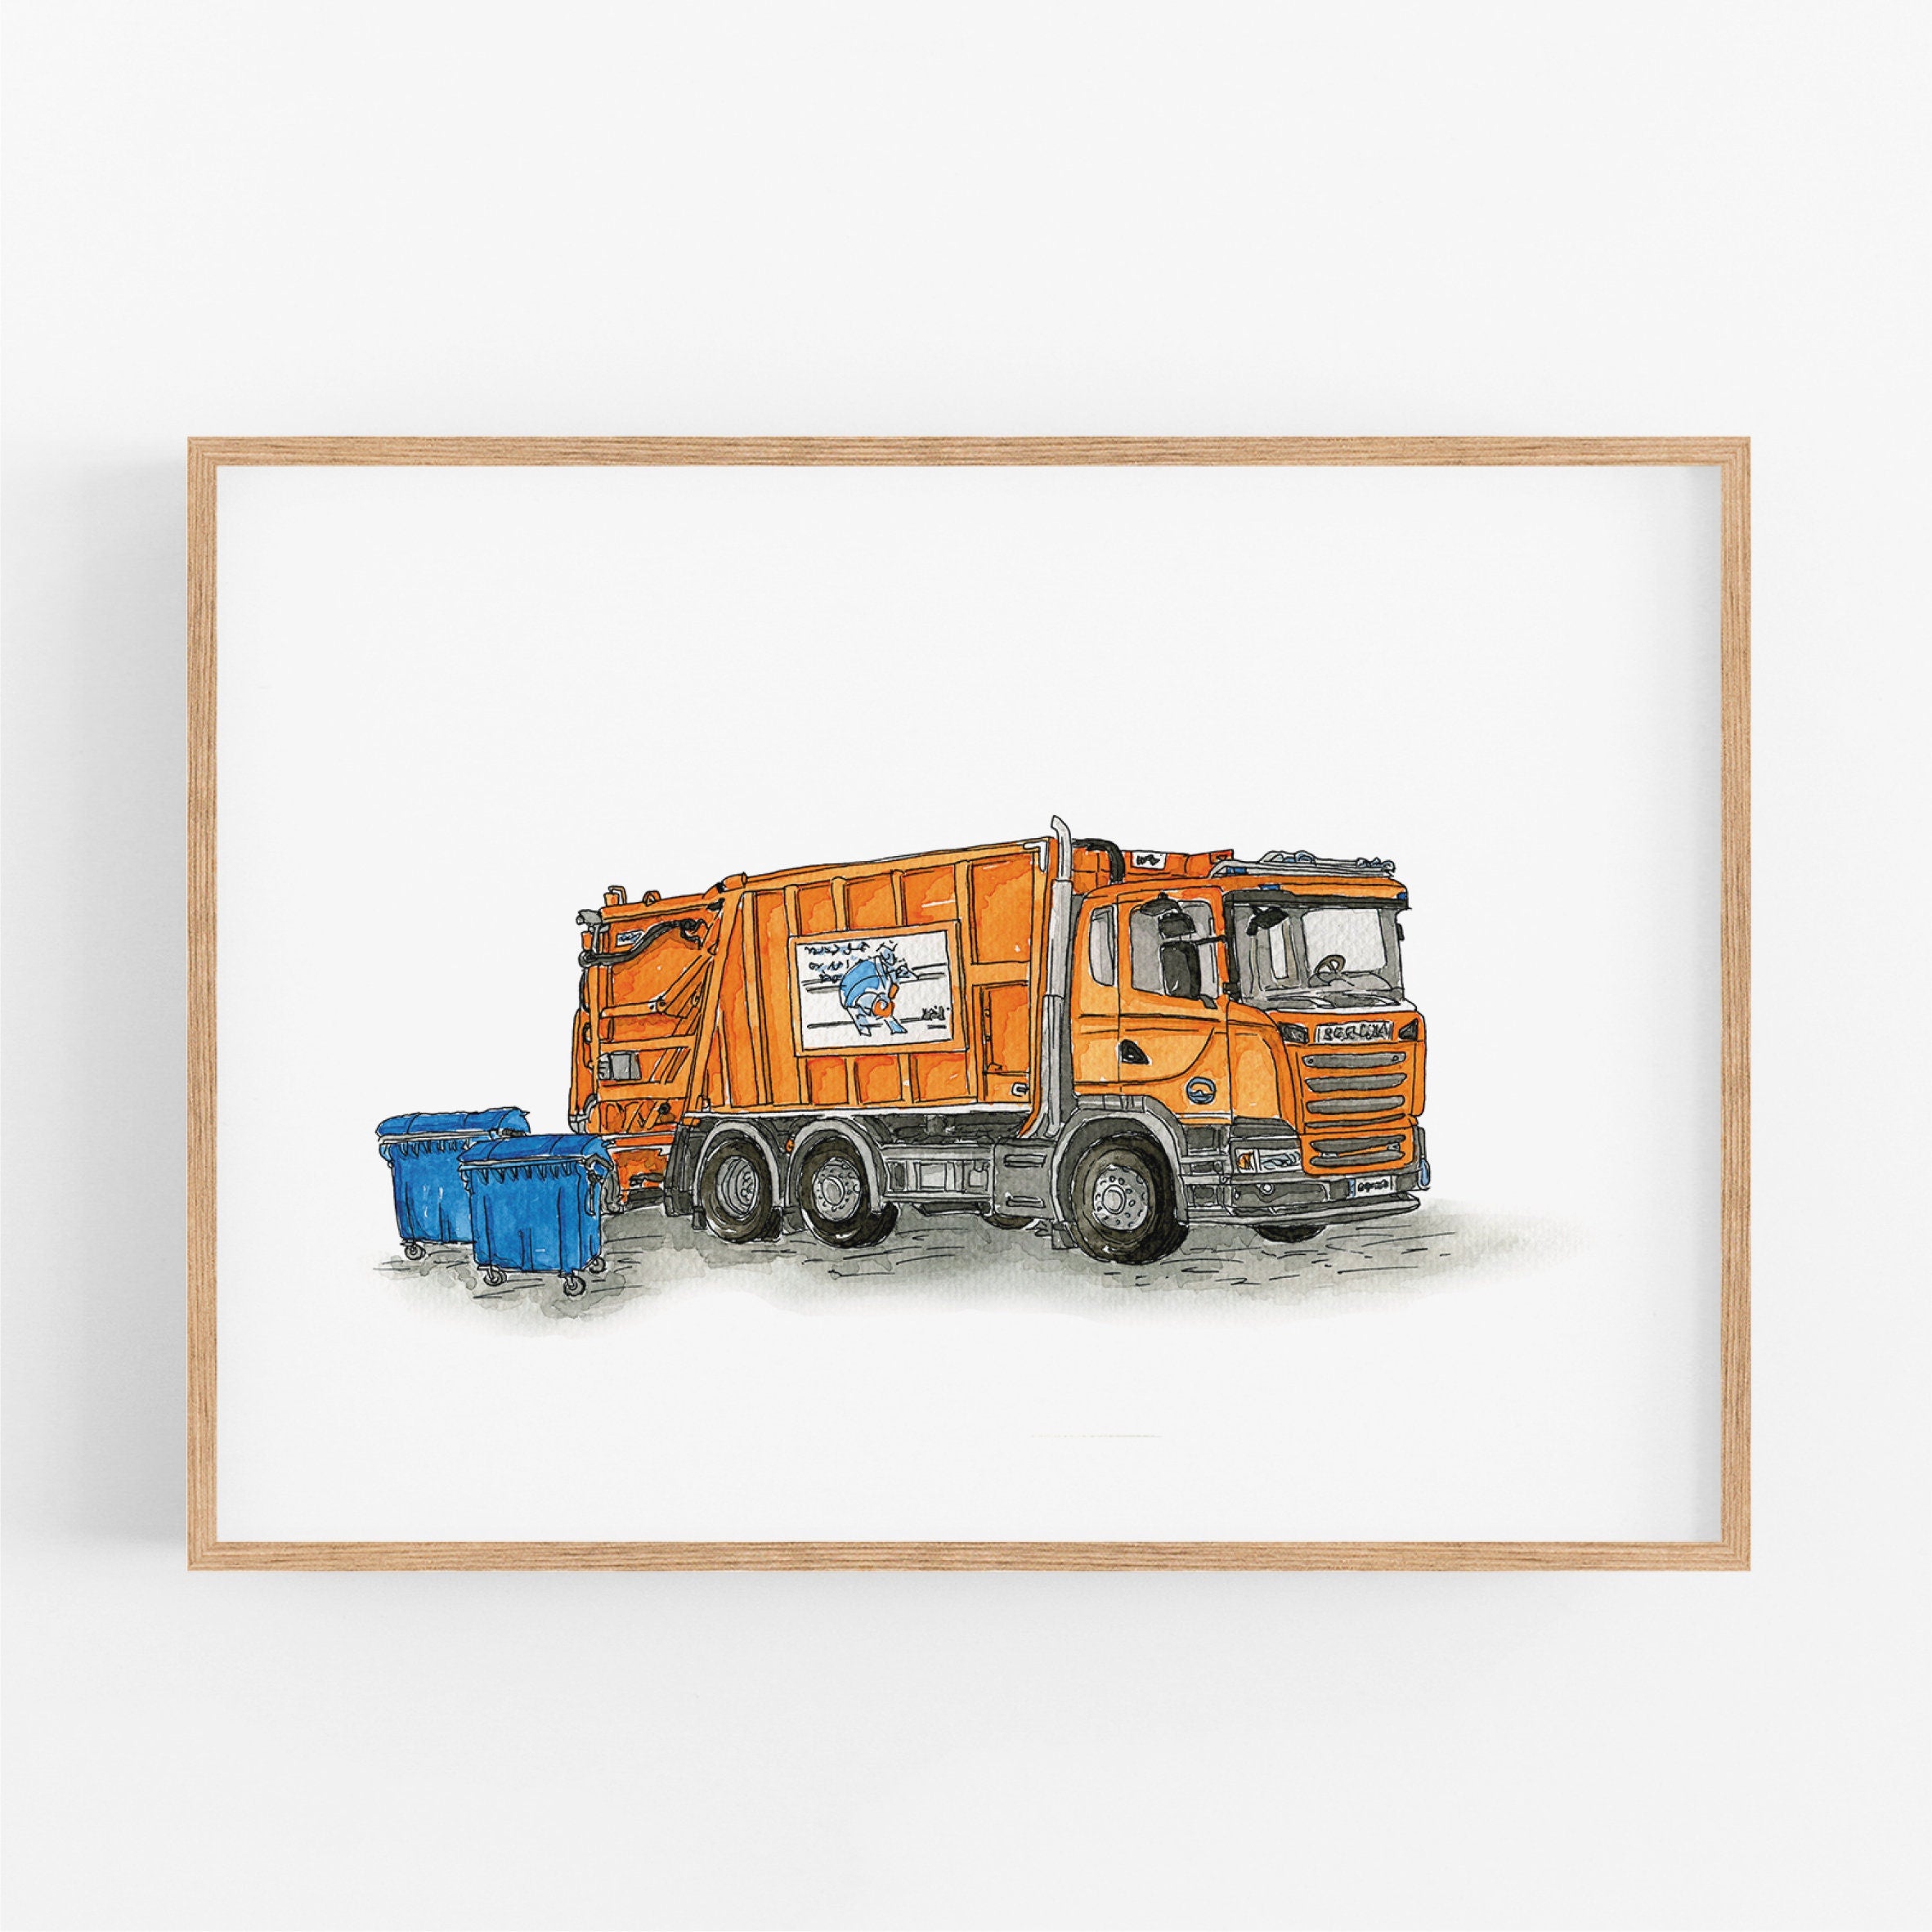 Vehicle Poster - Garbage Collection | Picture for the children's room | gift idea